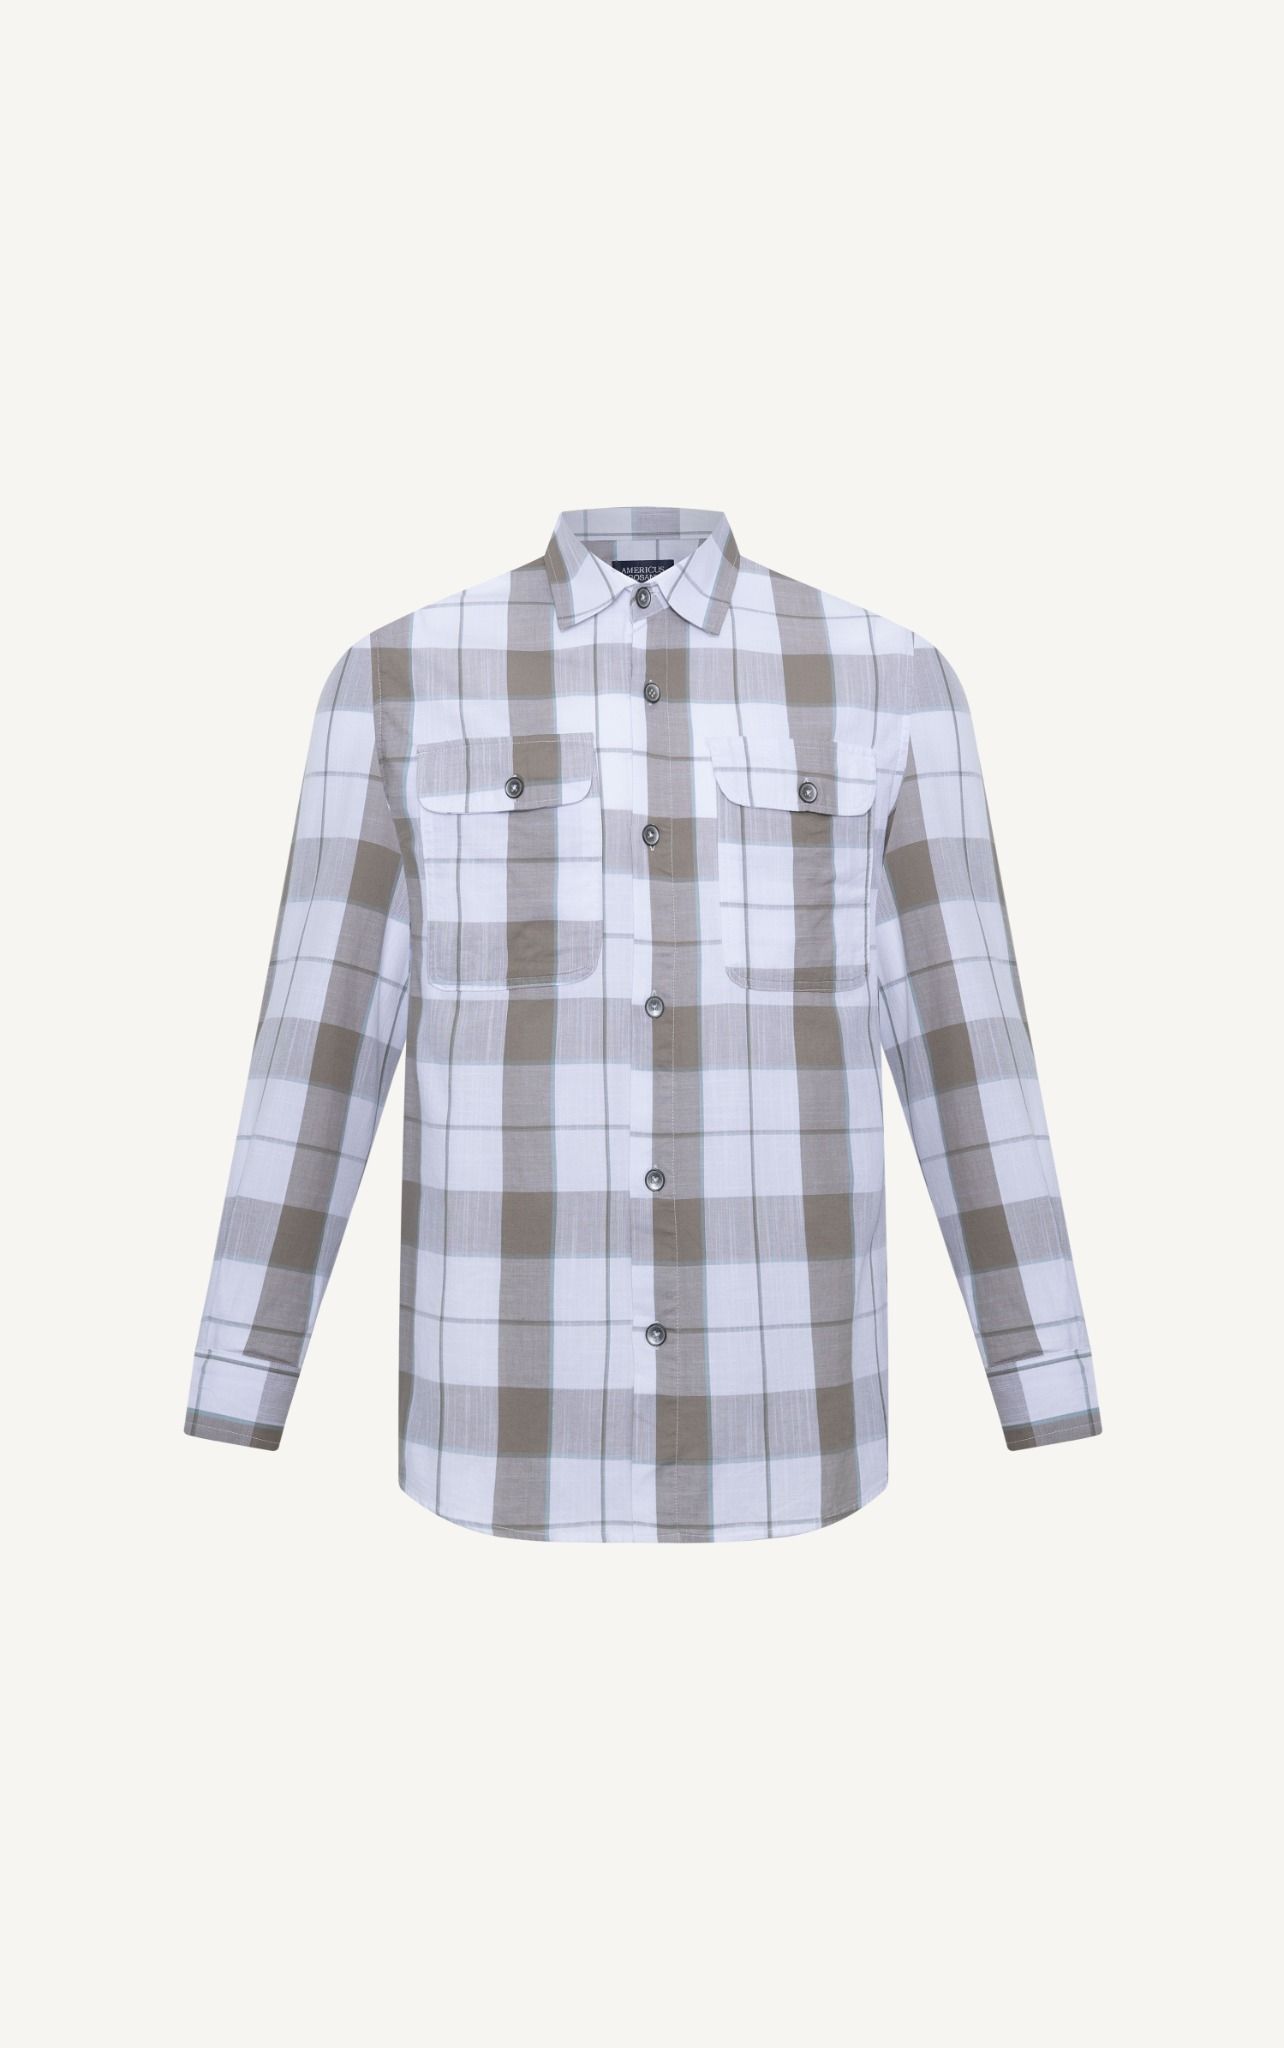  AG16 FACTORY REGULAR FIT MIX COLOR CHECKED SHIRT - BROWN 